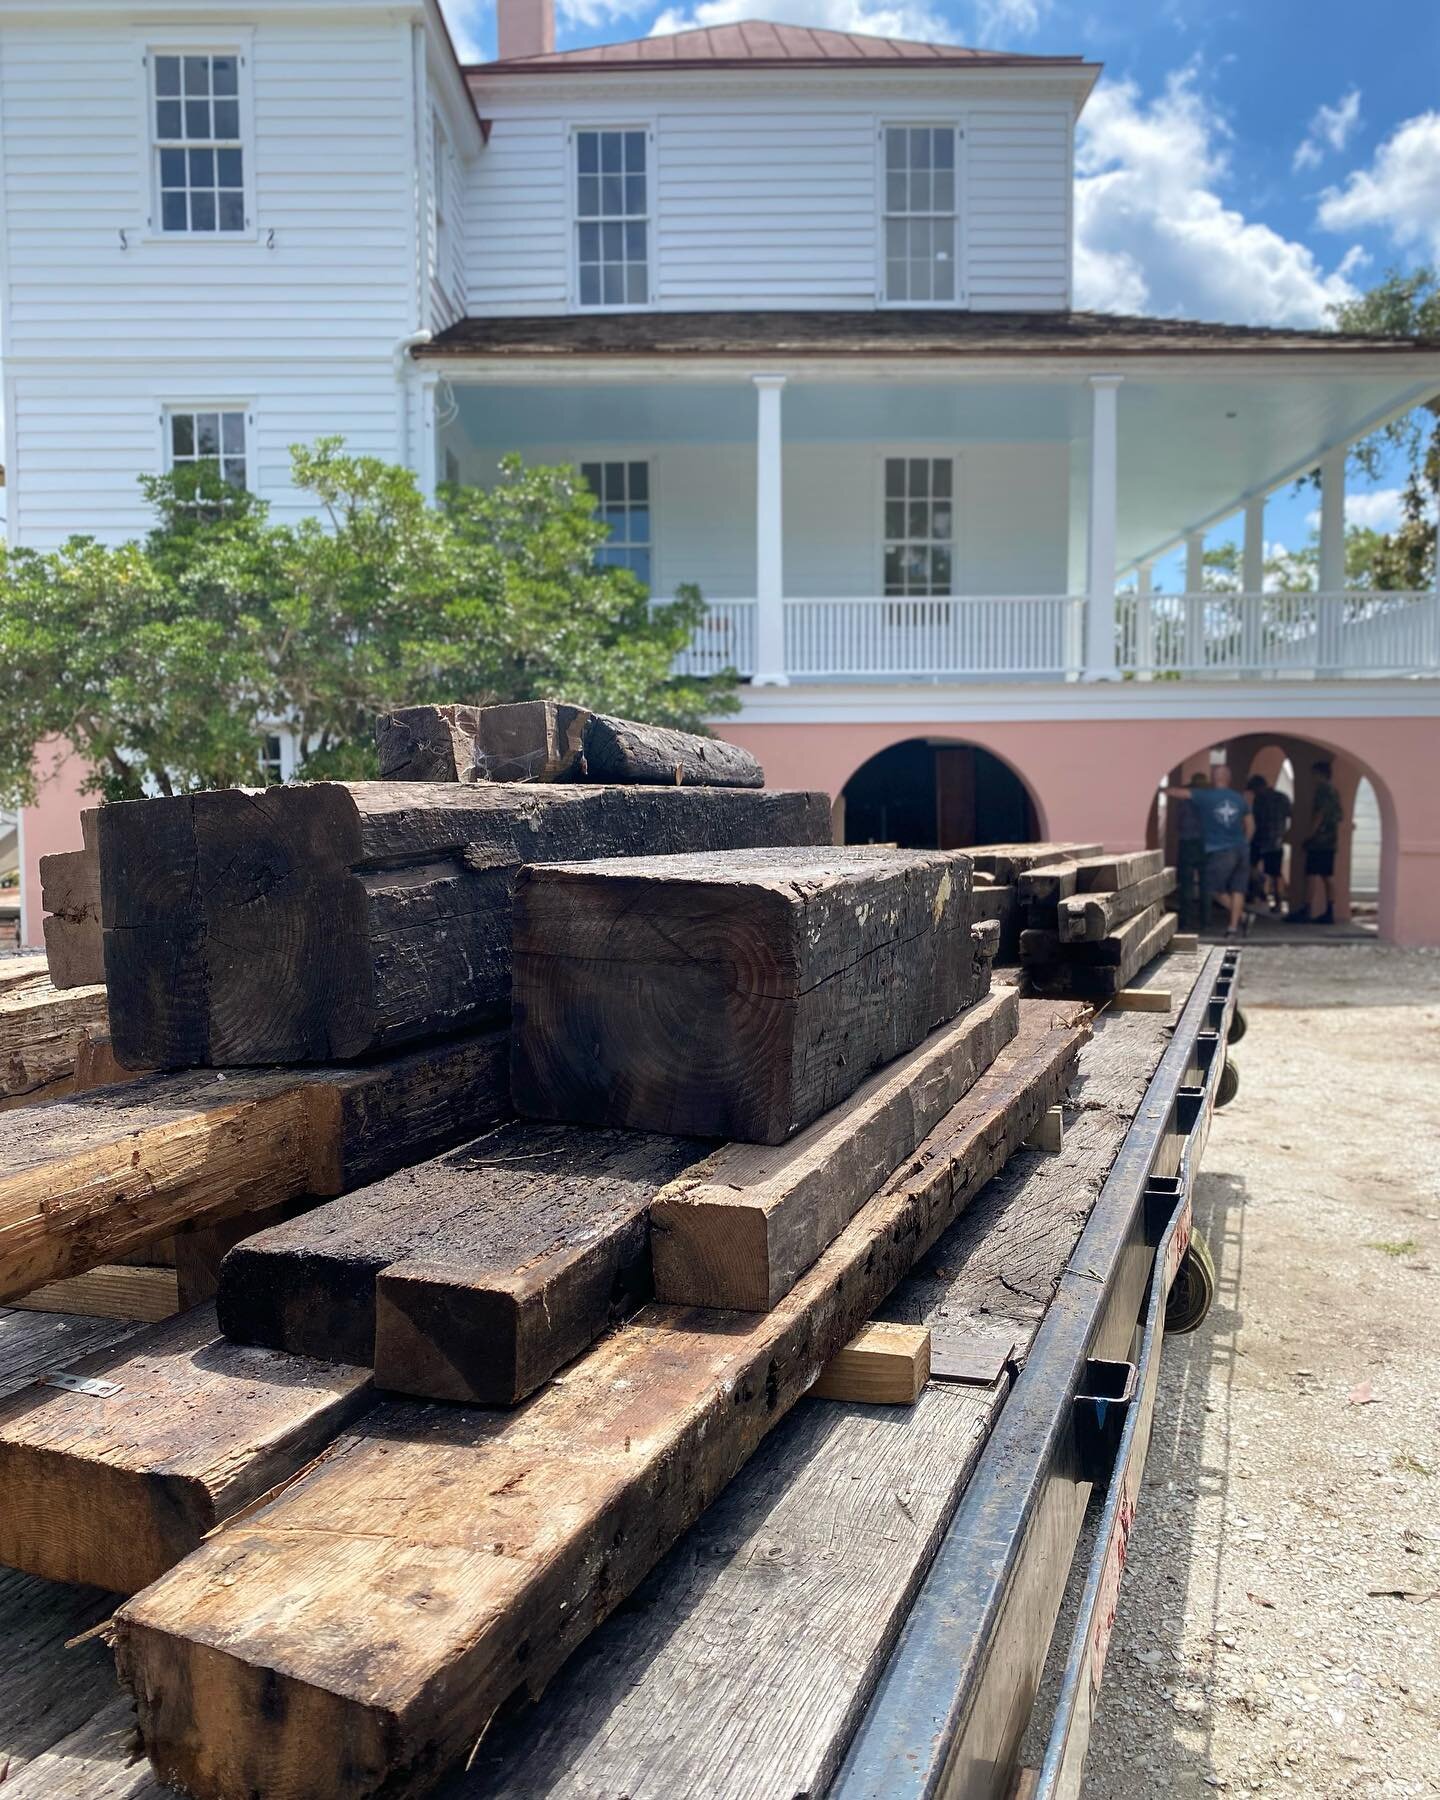 In Production // While install of the custom cabinetry is underway at this historic waterfront property - Downtown Beaufort.  We are thrilled to also have the opportunity to repurpose some of the original hand-hewn beams from the house.  We're talkin